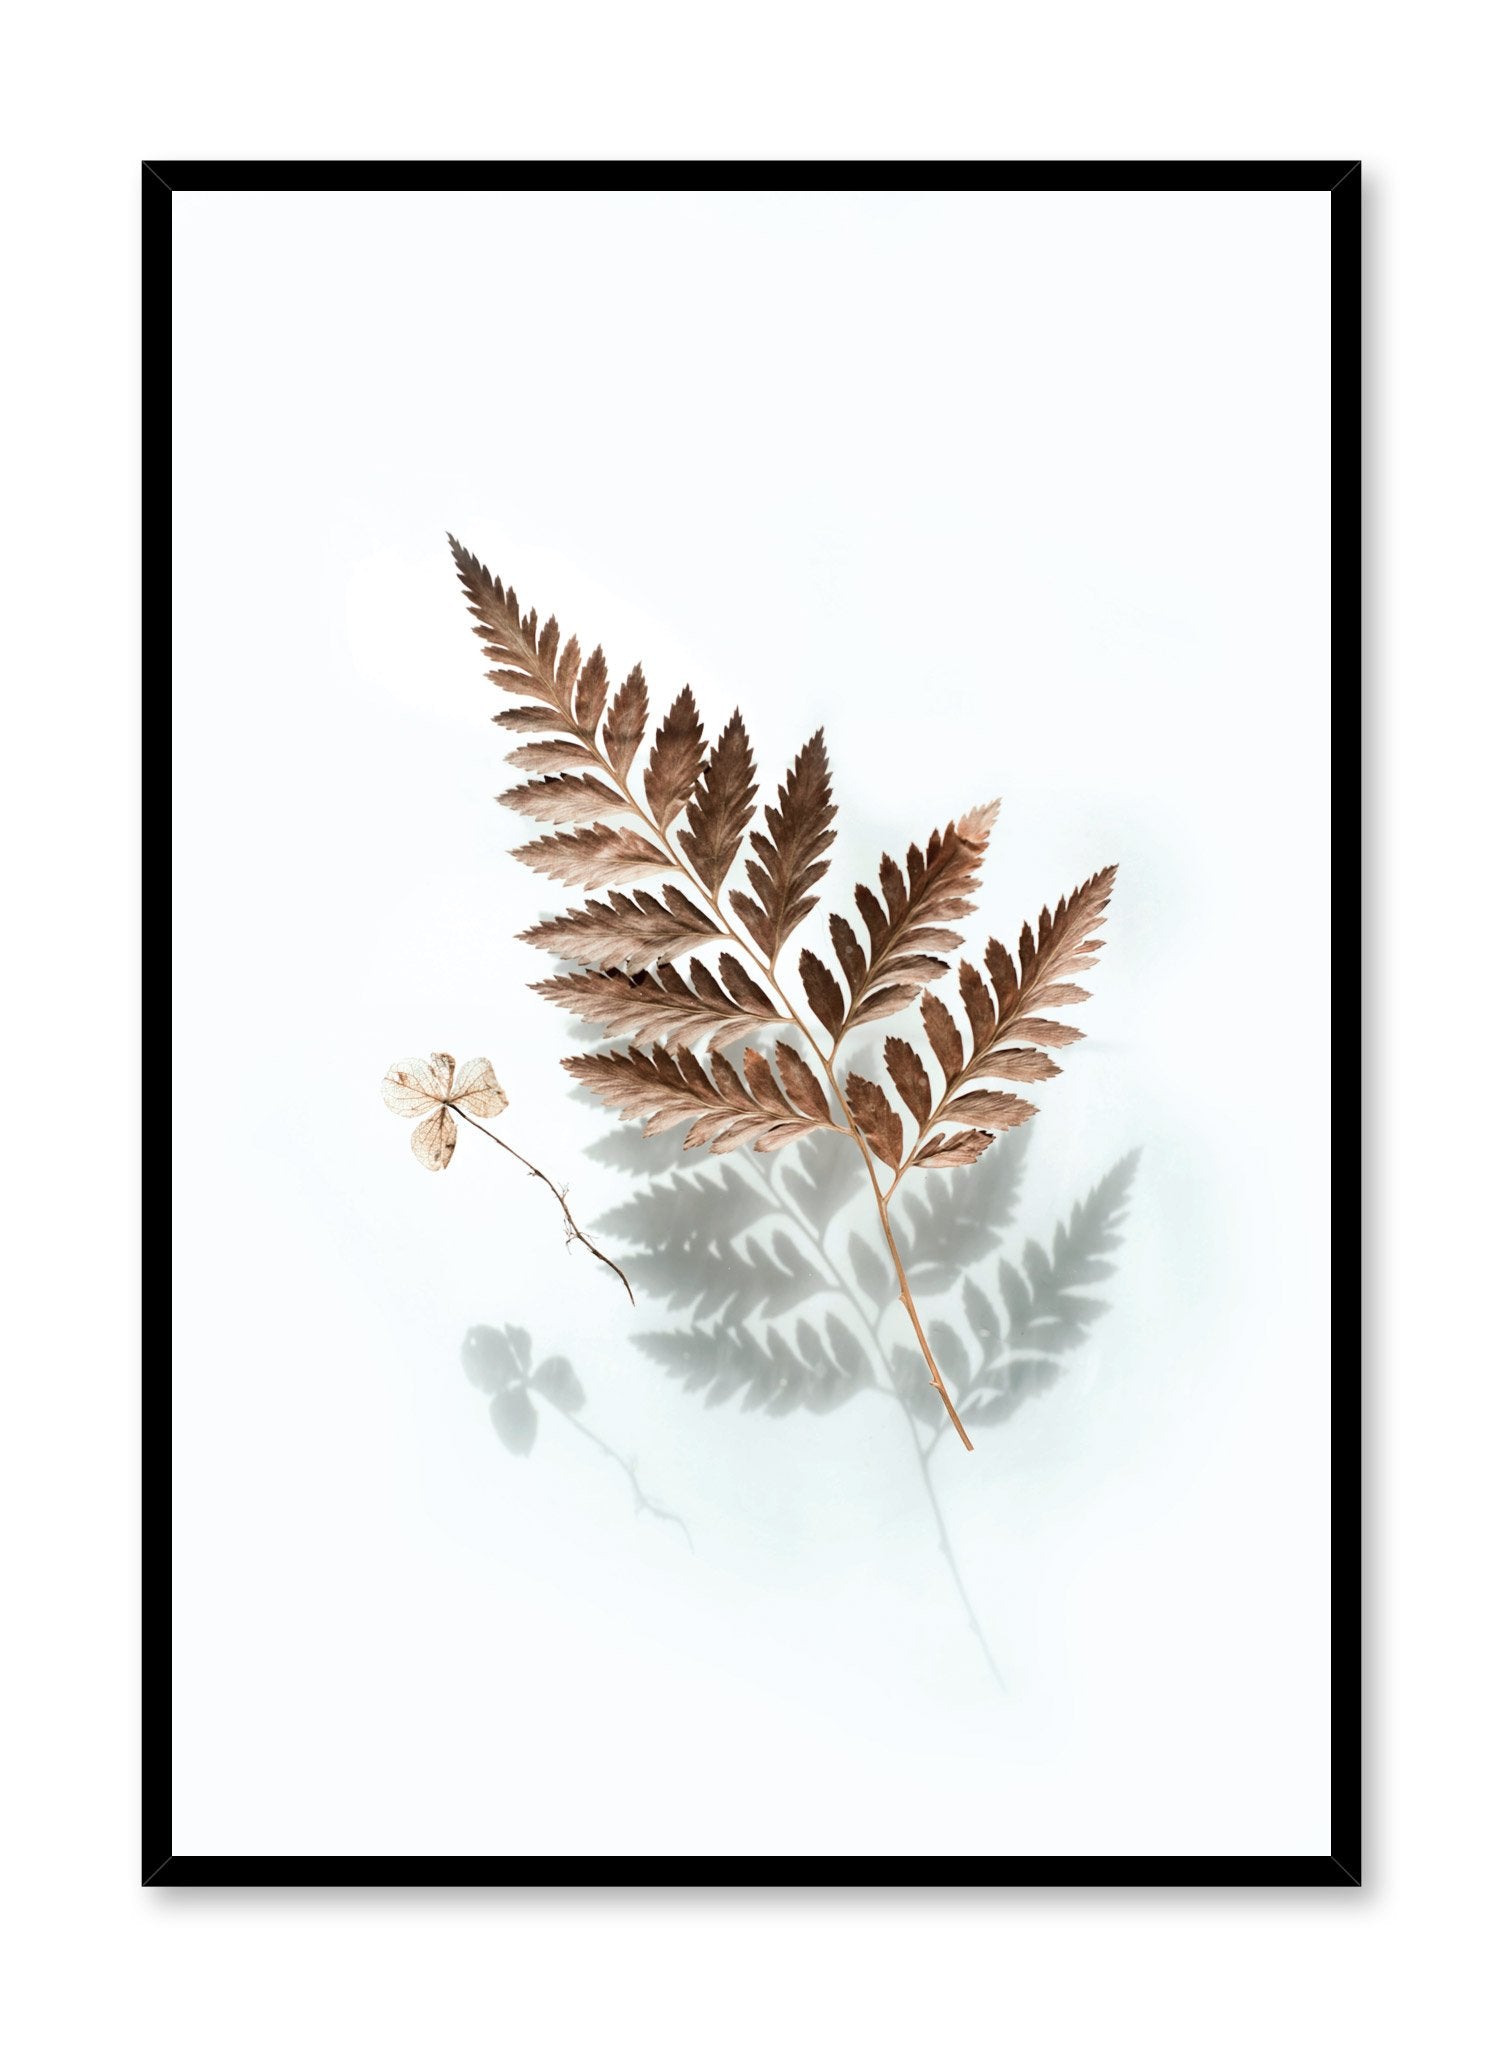 Modern minimalist botanical photography poster by Opposite Wall with floating fern leaf